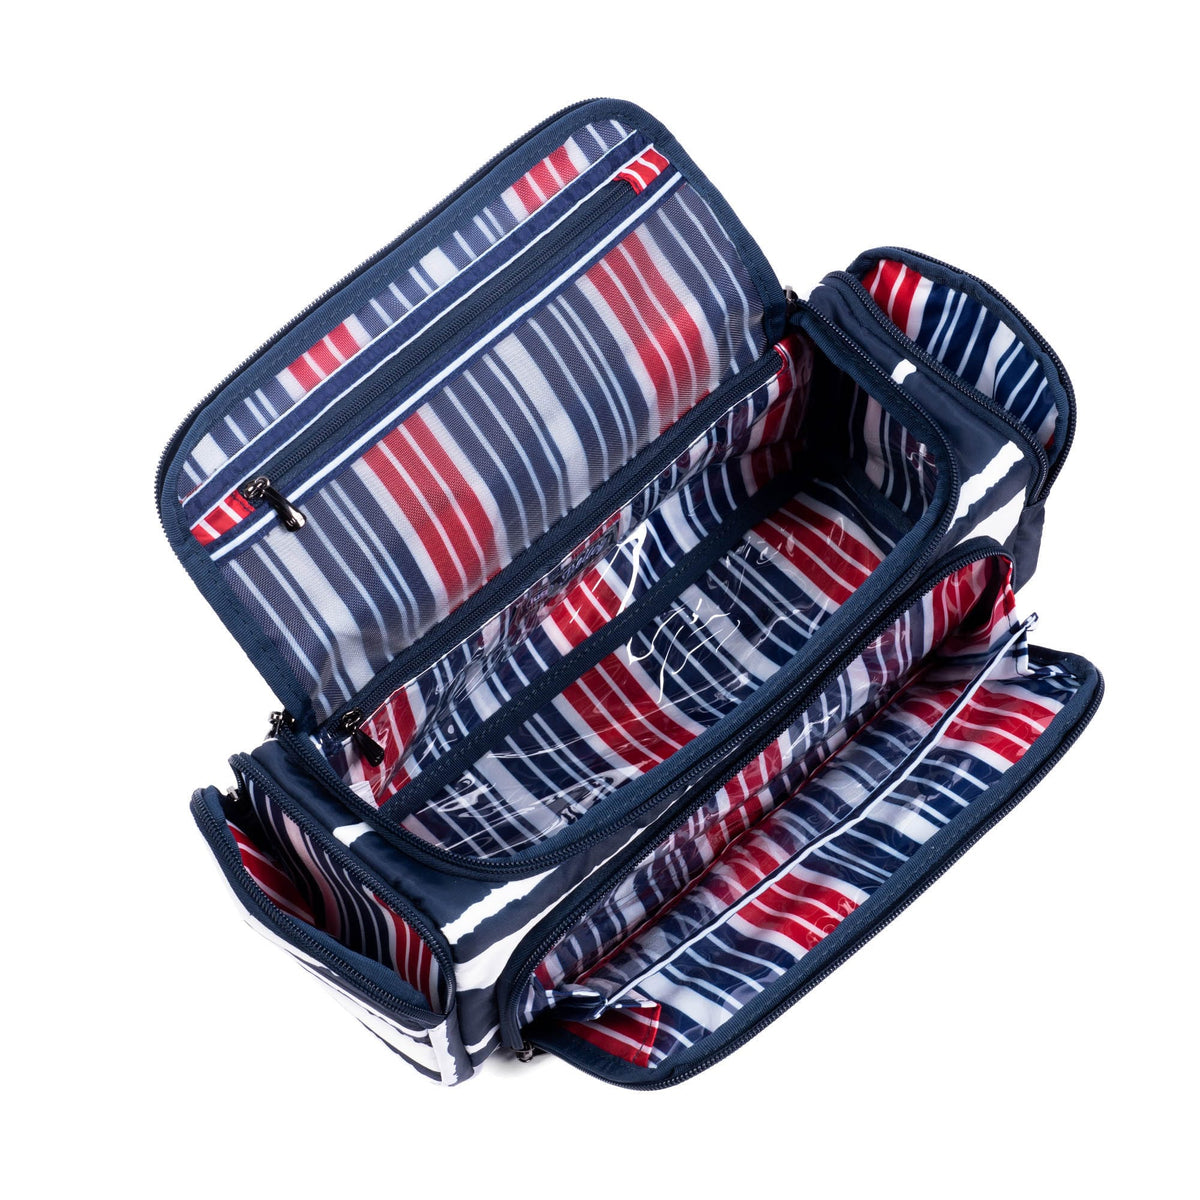 Fashionable & Simple Portable Striped Makeup Bag With Zipper